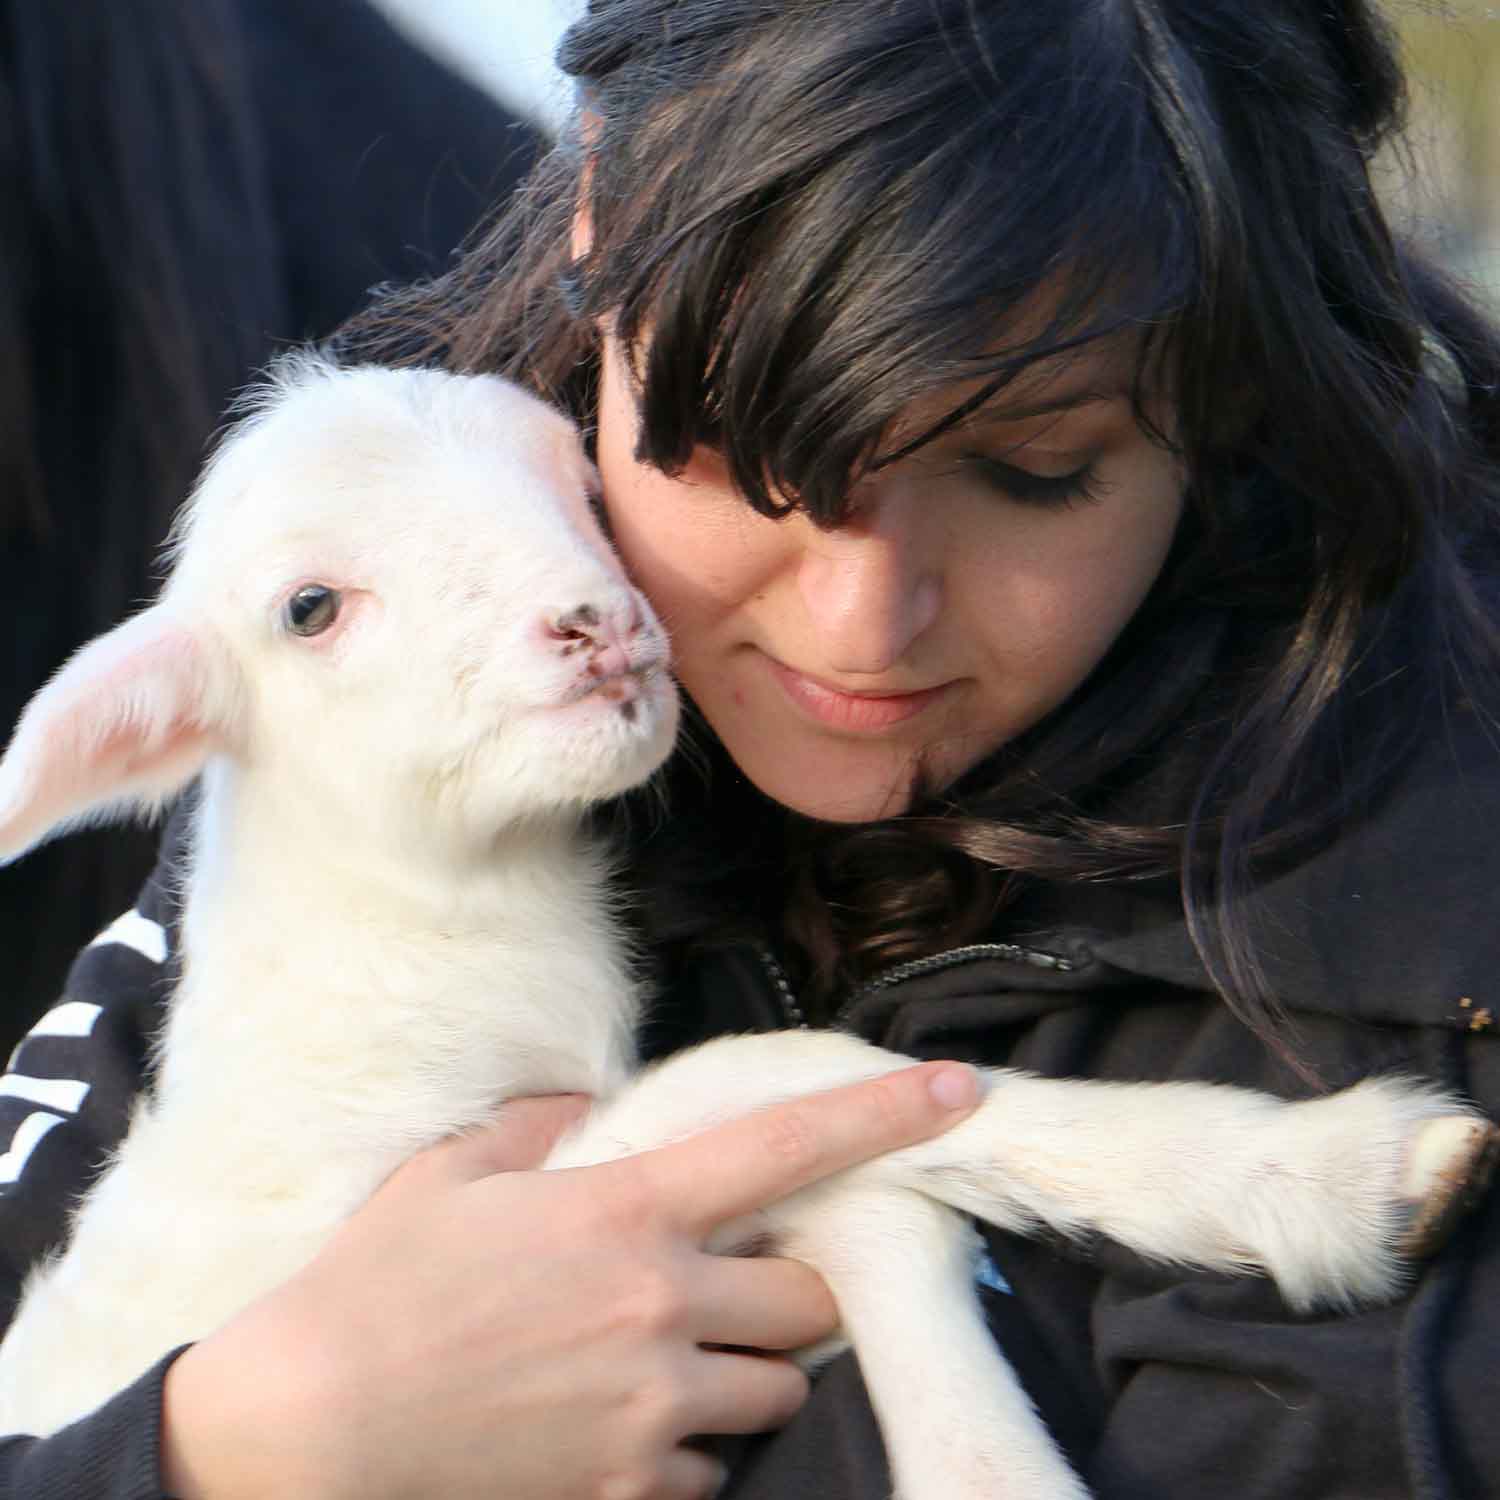 Animal Equality volunteer with a rescued lamb